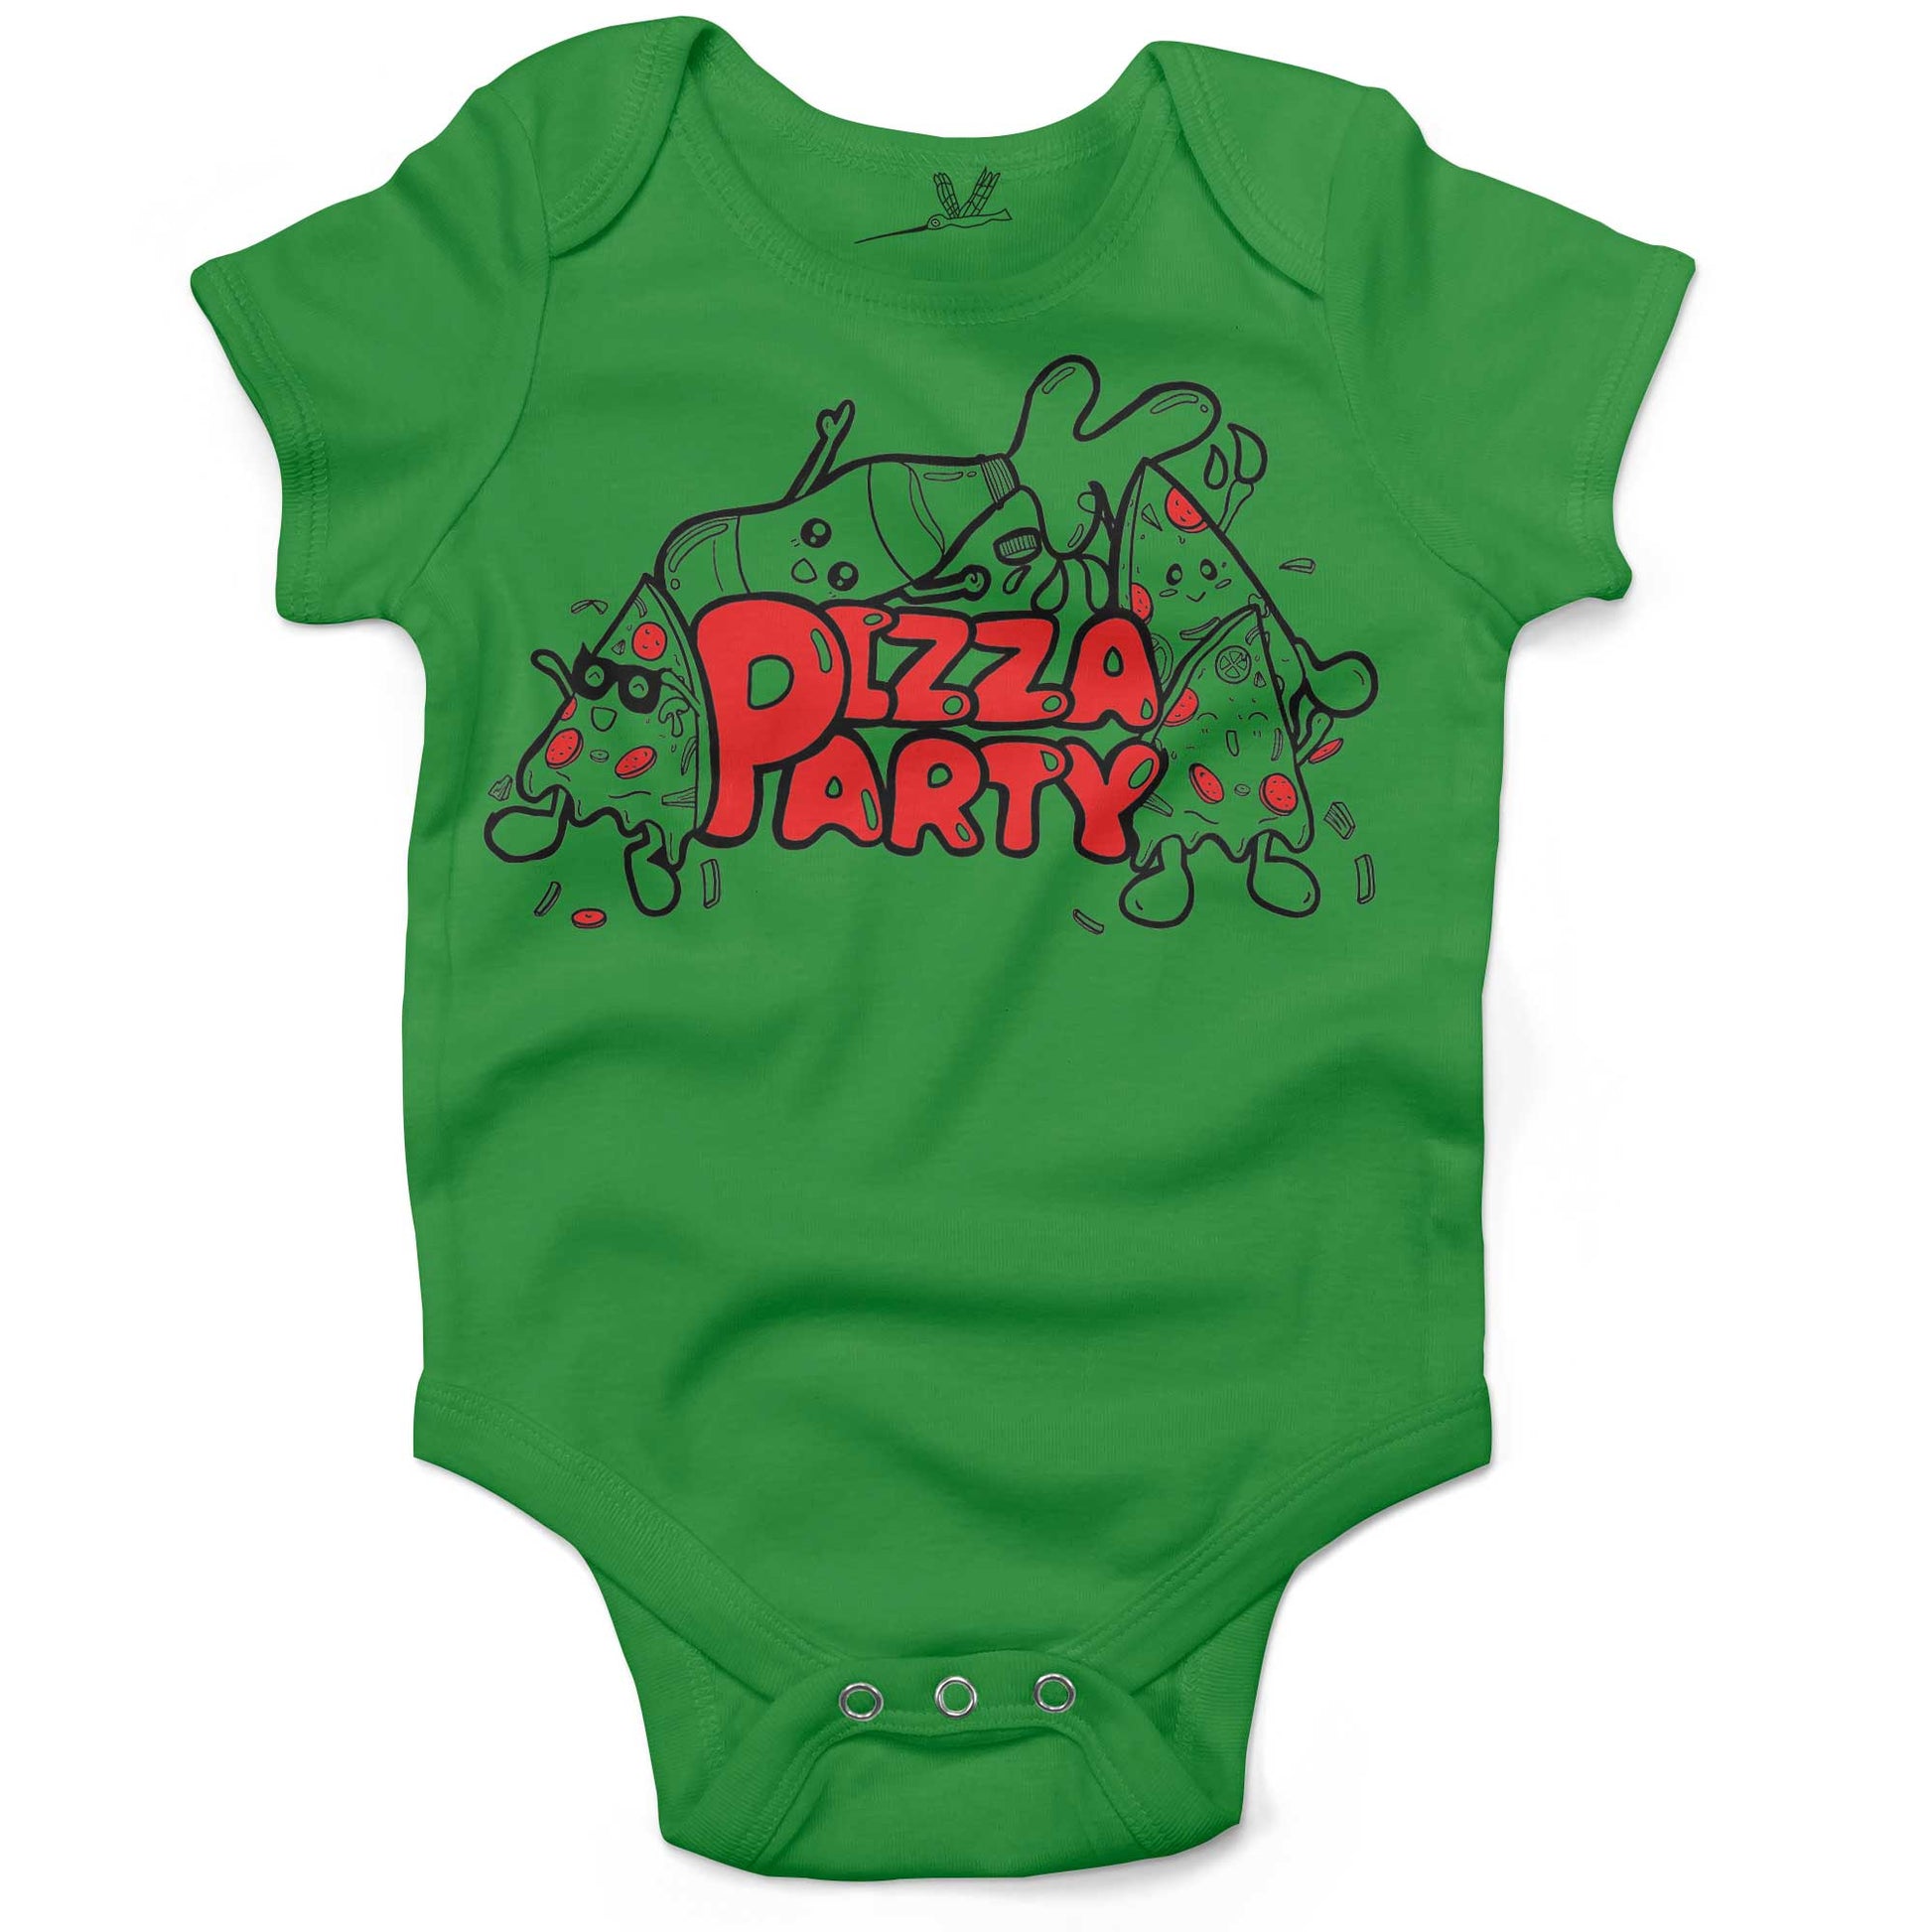 Pizza Party Infant Bodysuit or Raglan Baby Tee-Grass Green-3-6 months